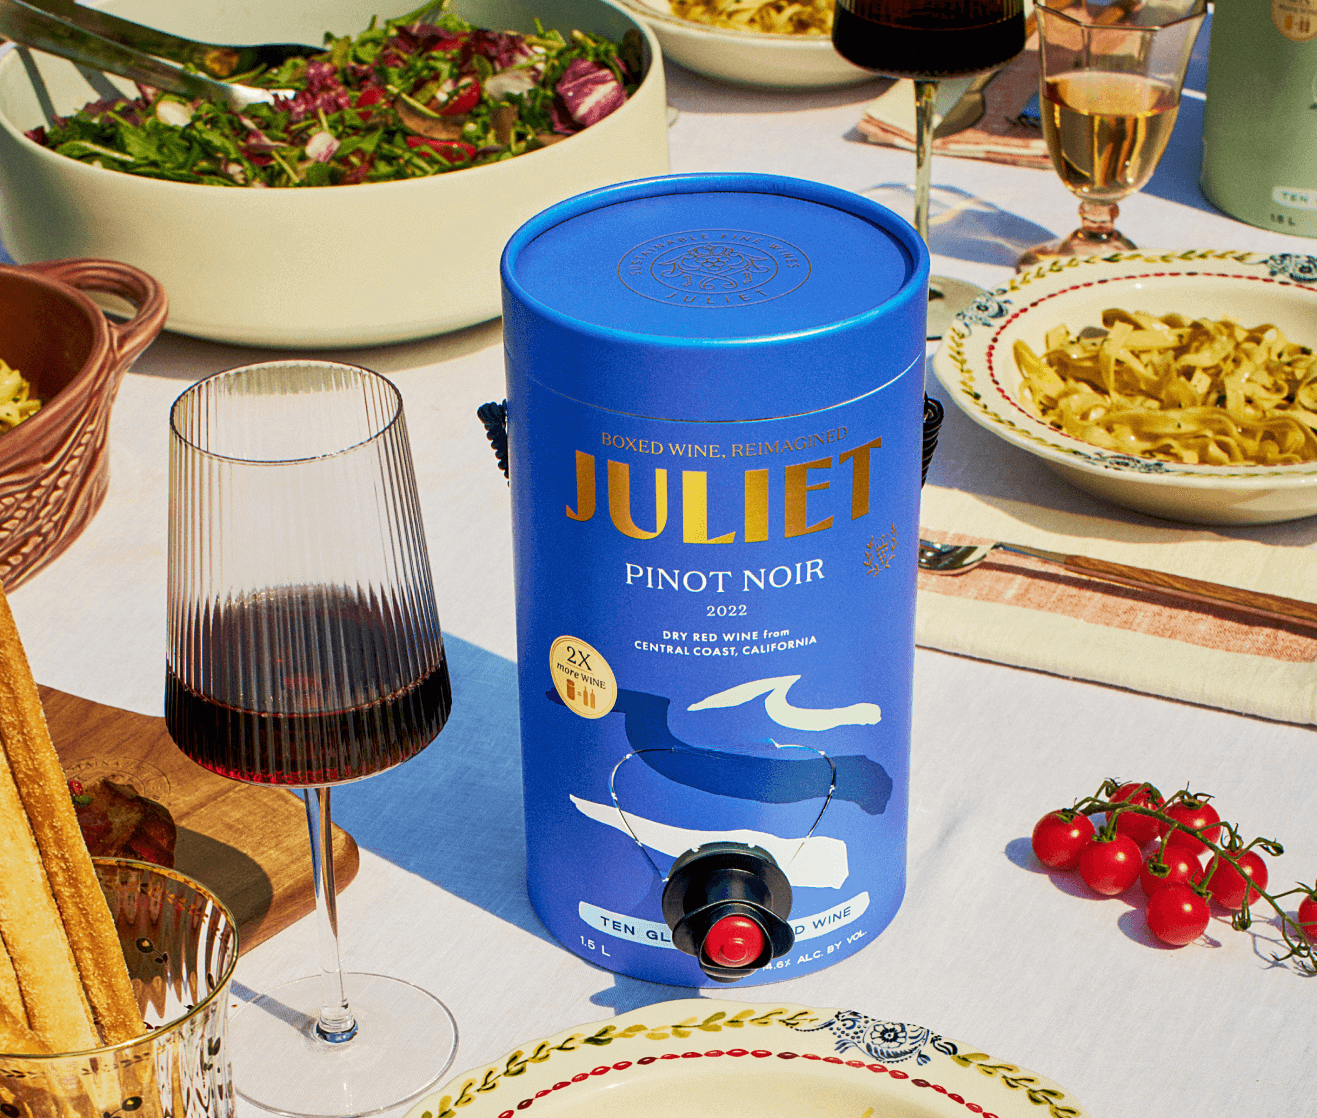 NEW LUXURY WINE BRAND, JULIET, LAUNCHES WITH SUSTAINABILITY AT THE